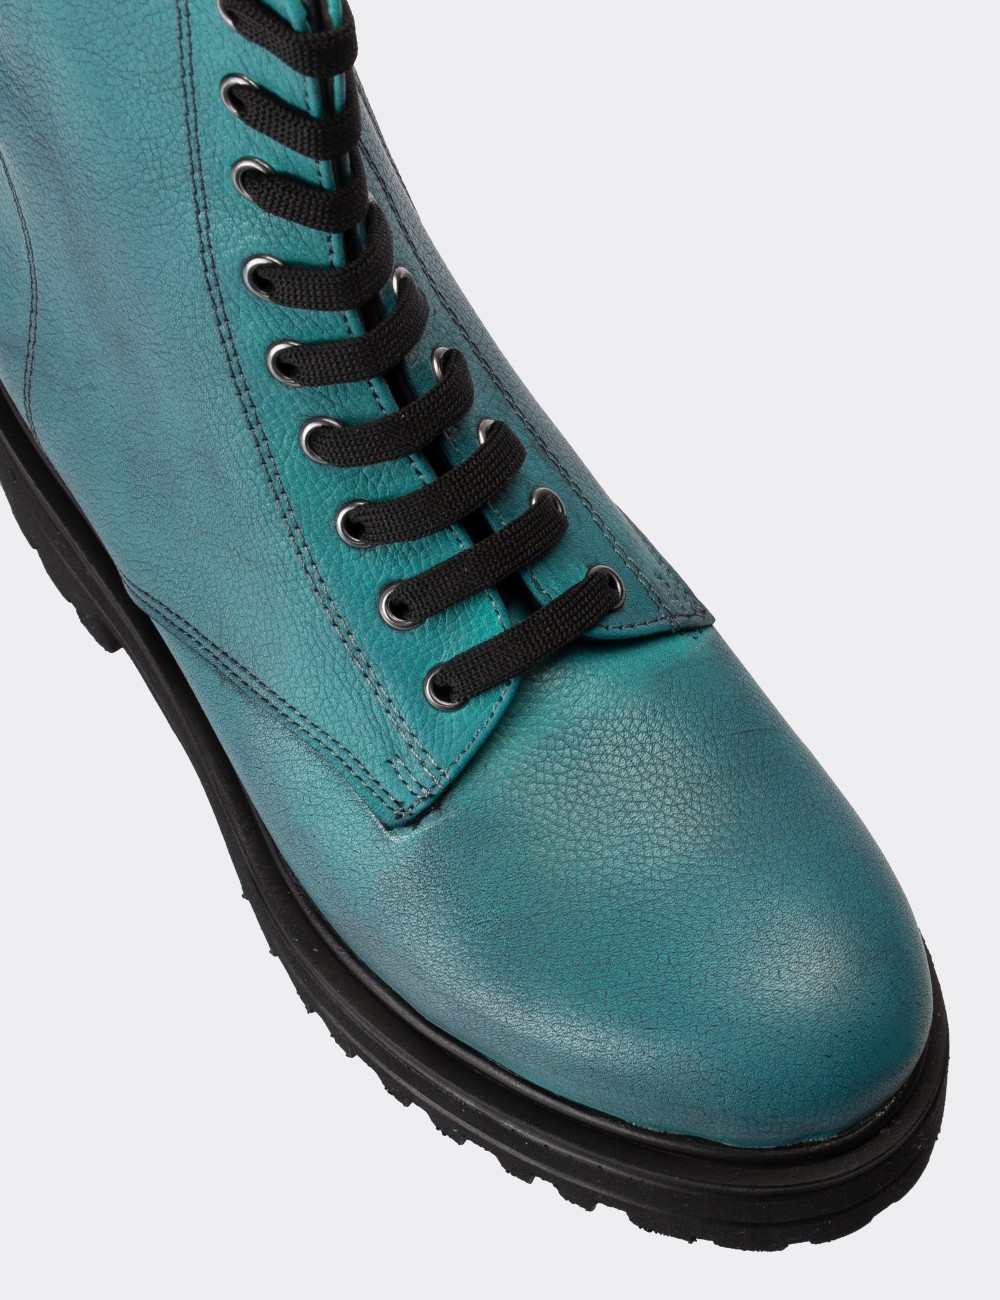 Green  Leather Boots - 01814ZYSLE06